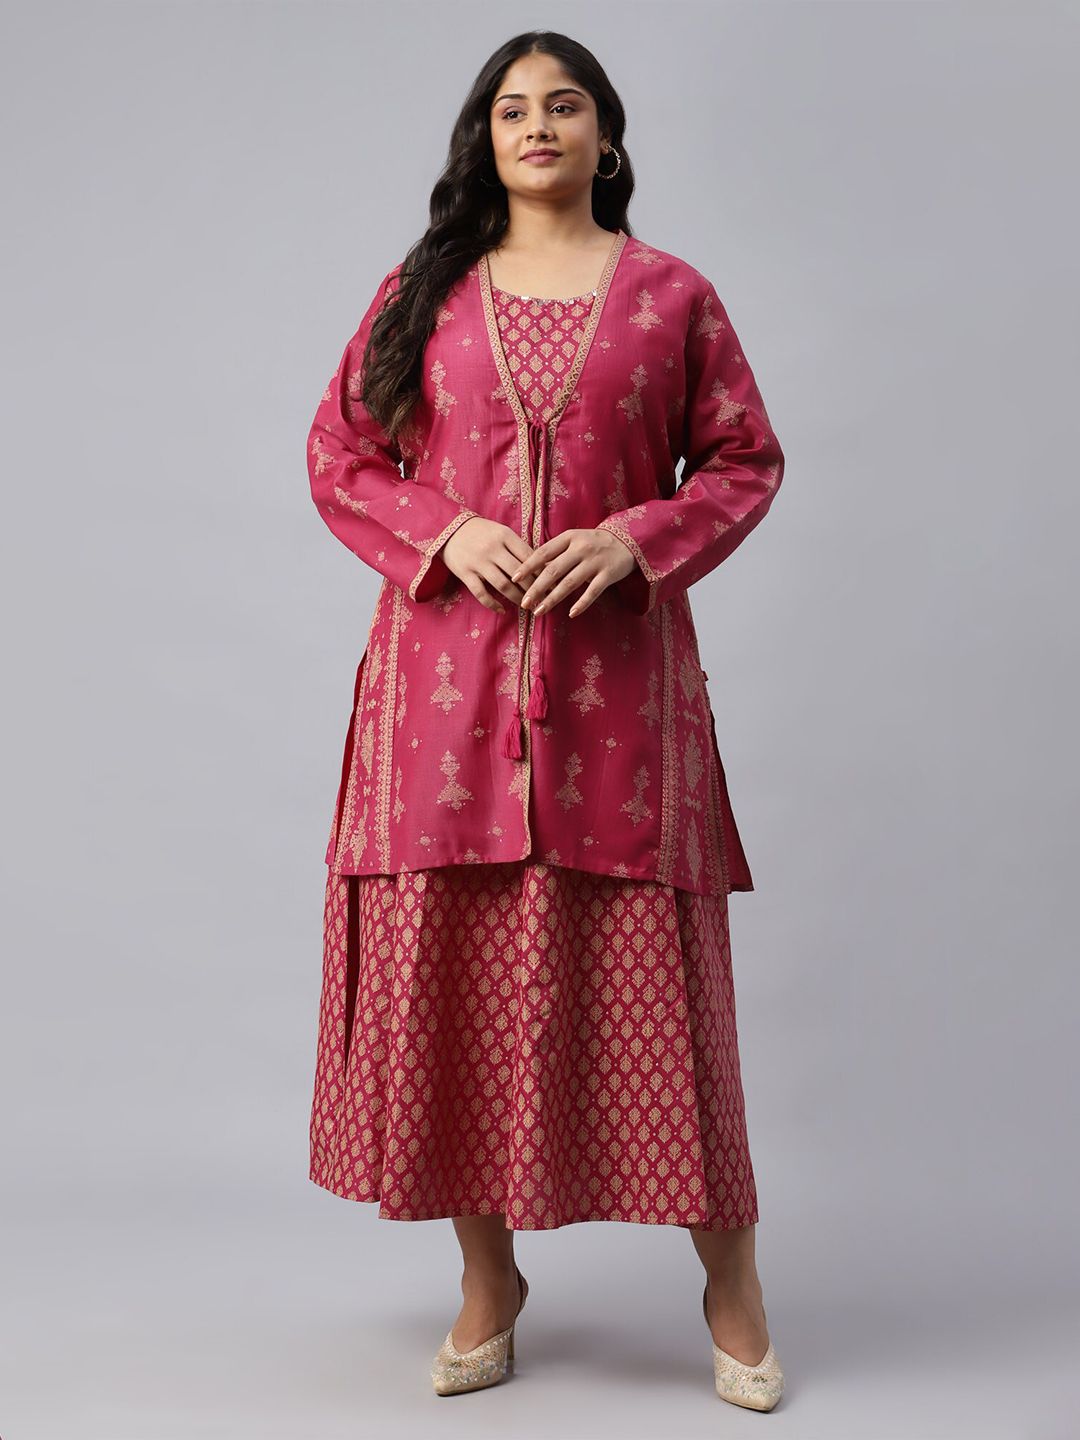 W Pink Ethnic Motifs Satin Ethnic A-Line Maxi Dress Price in India